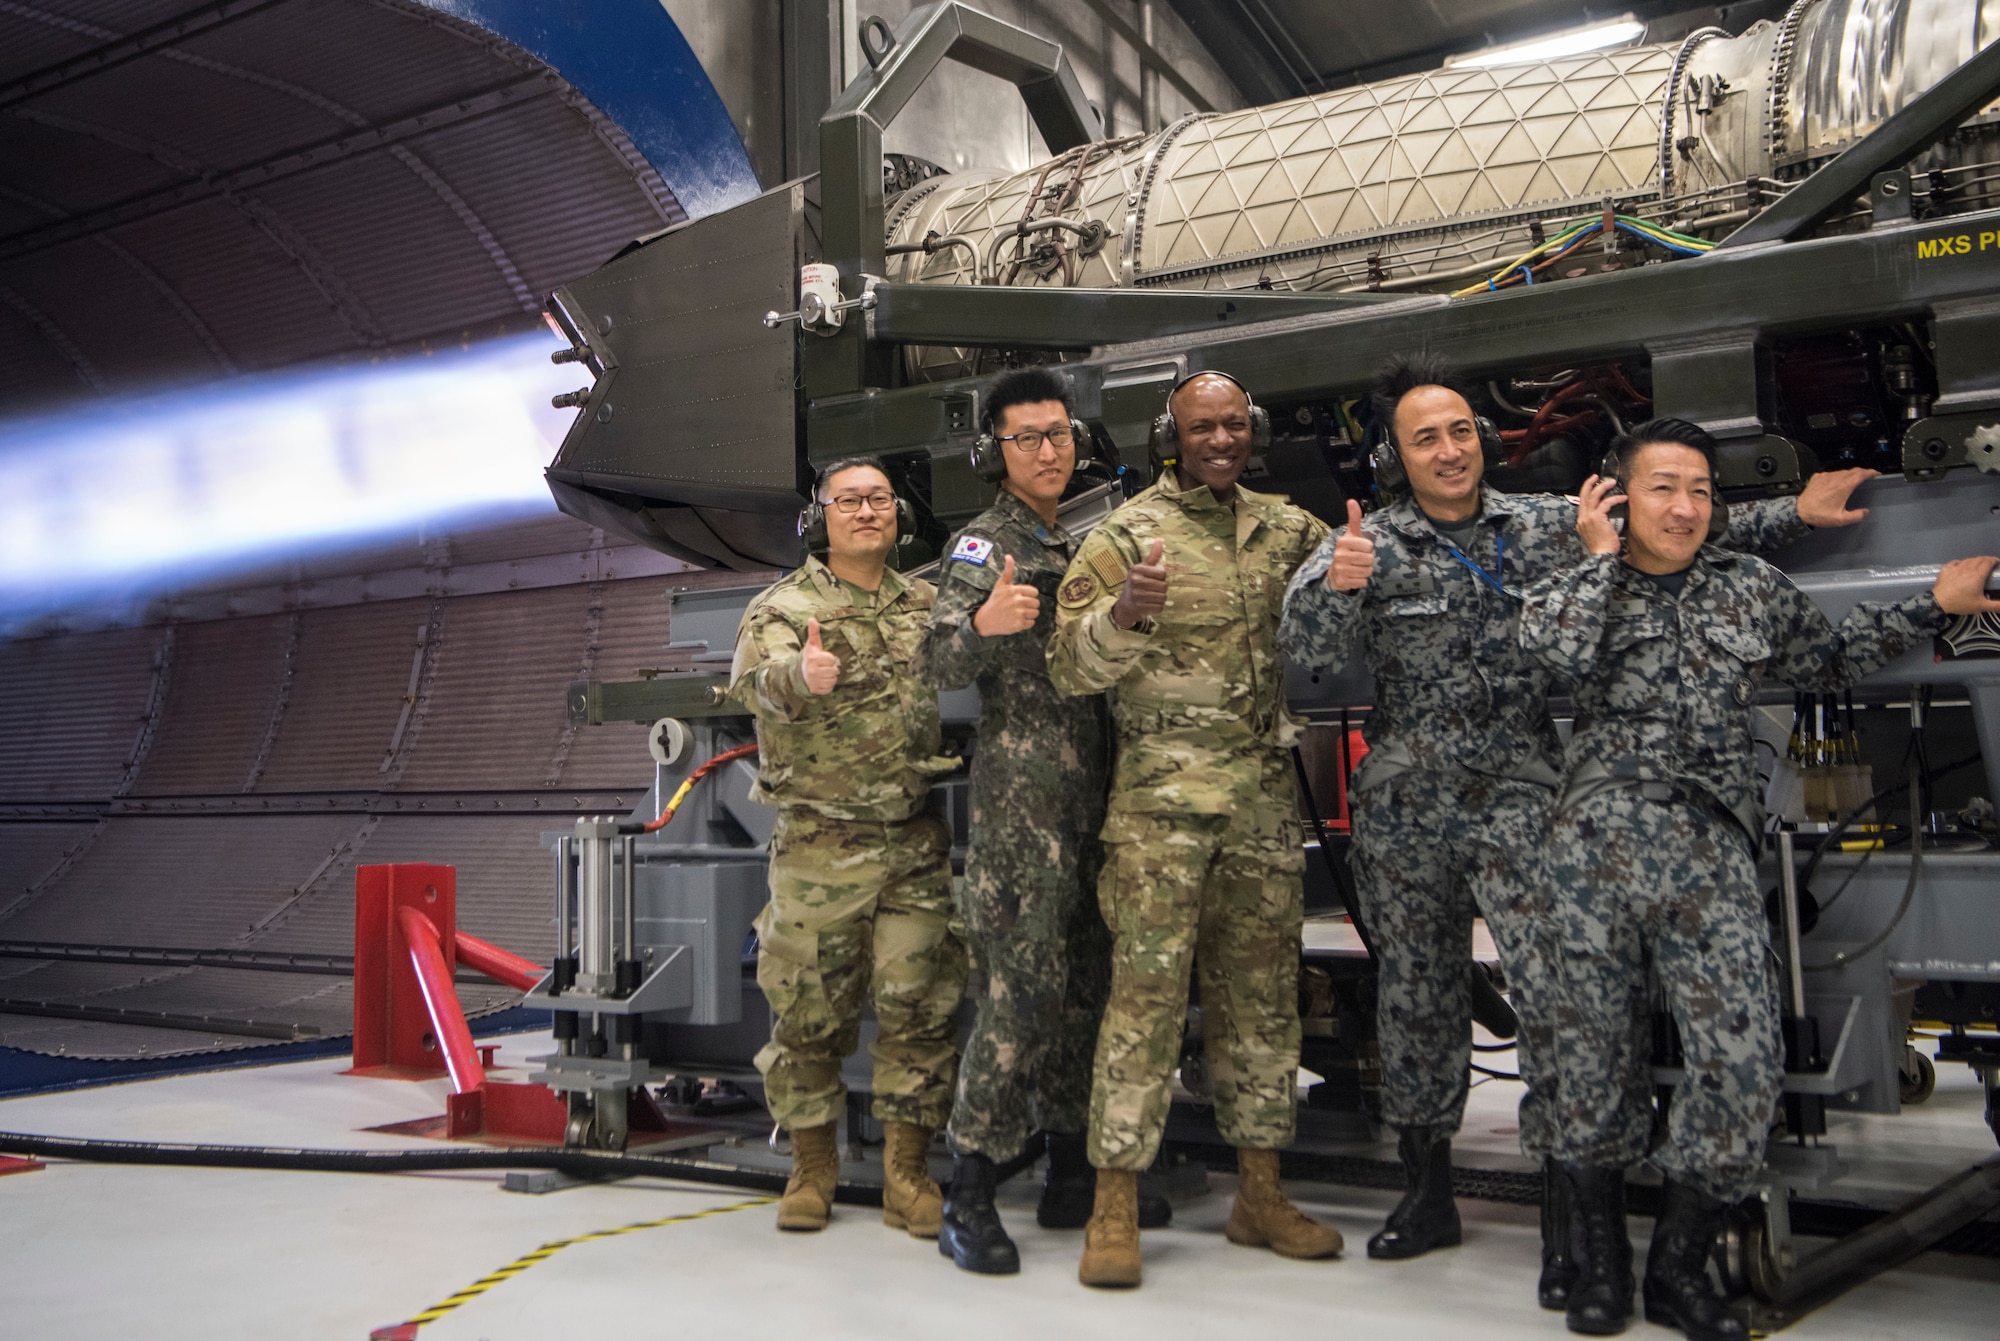 CMSAF, chief master sergeant of the Republic of Korea, and  other senior enlisted leaders during an F-22 Raptor jet engine test